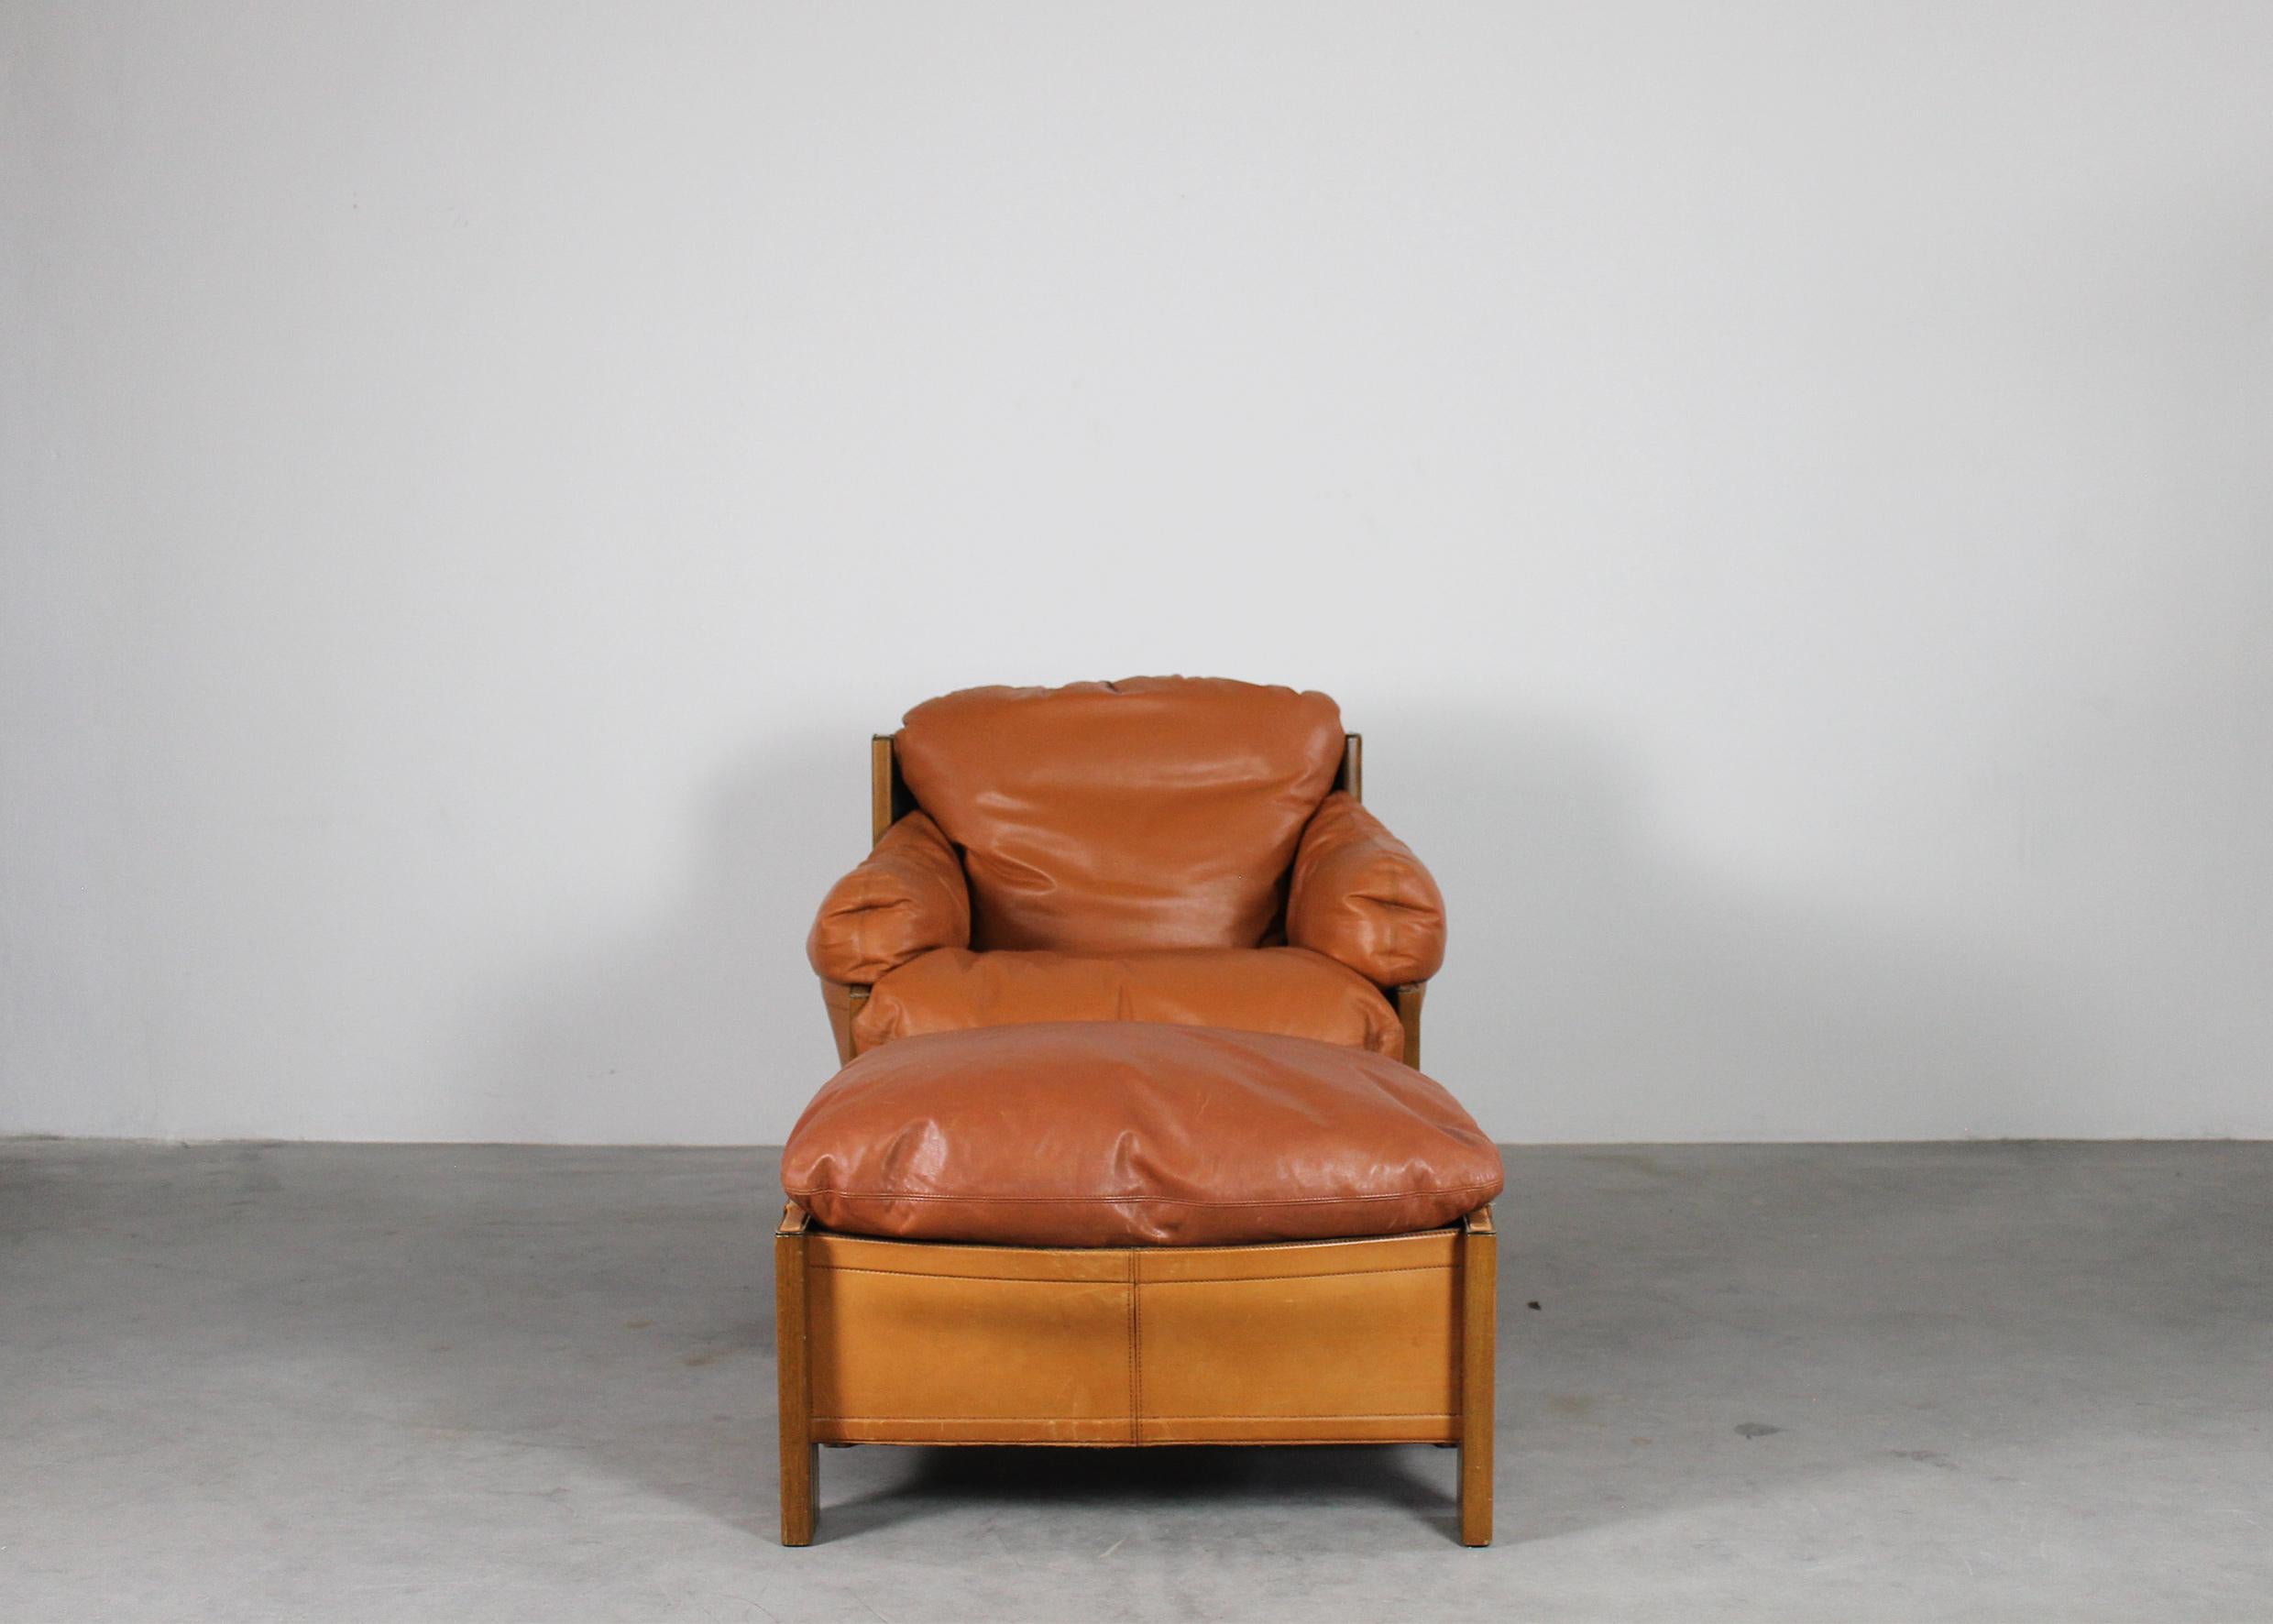 A set with an armchair and footrest with a frame in wood and upholstery in cognac leather, designed by Tobia and Afra Scarpa and manufactured by Maxalto from the Artona series 1975 ca. 

Tobia Scarpa and his wife Afra Bianchin began their long